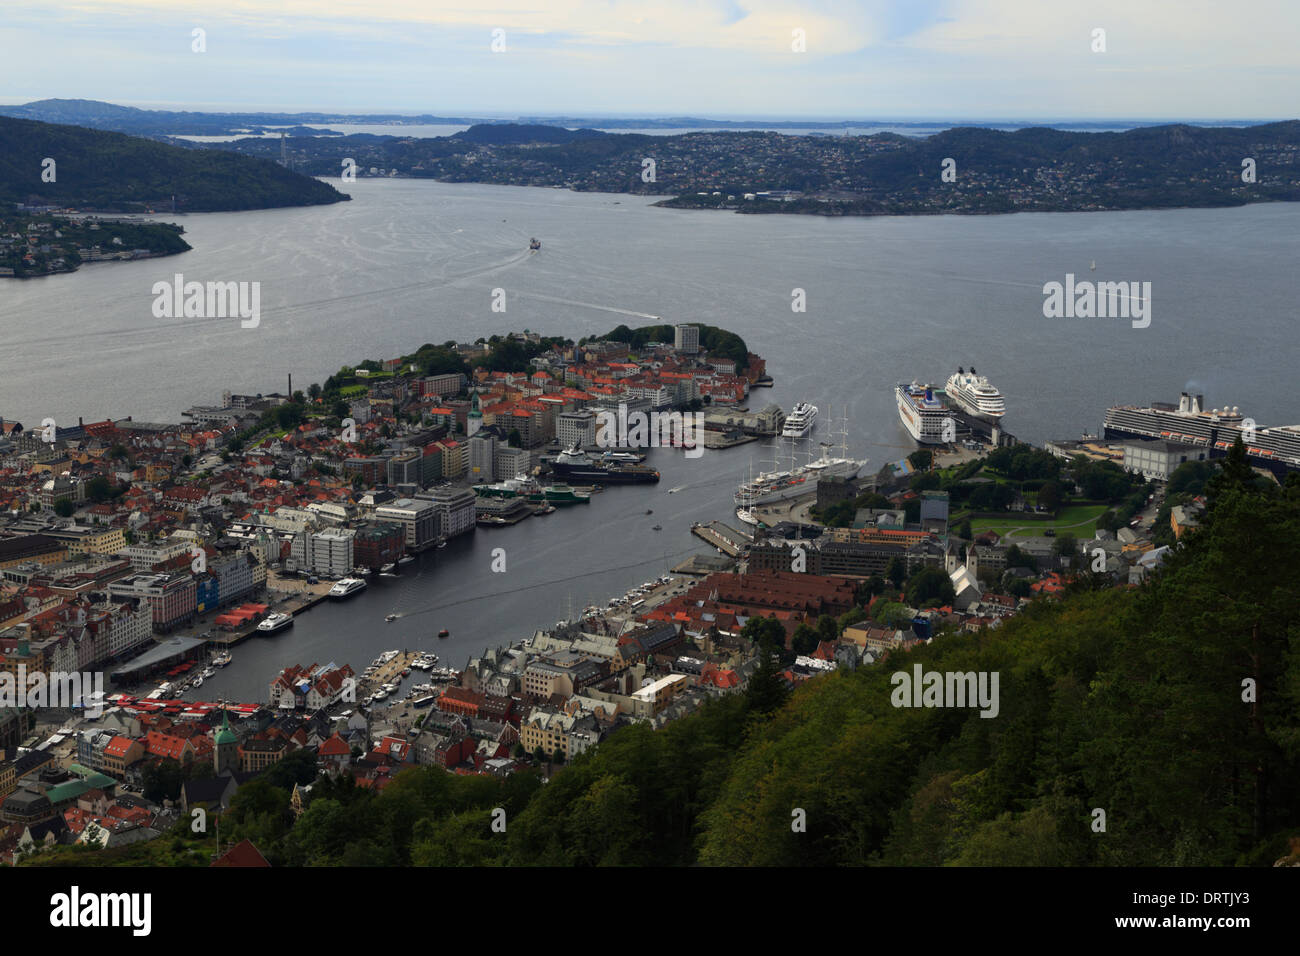 View over Bergen city, the harbour, and fjords, from Mount Fløyen in Norway. Stock Photo